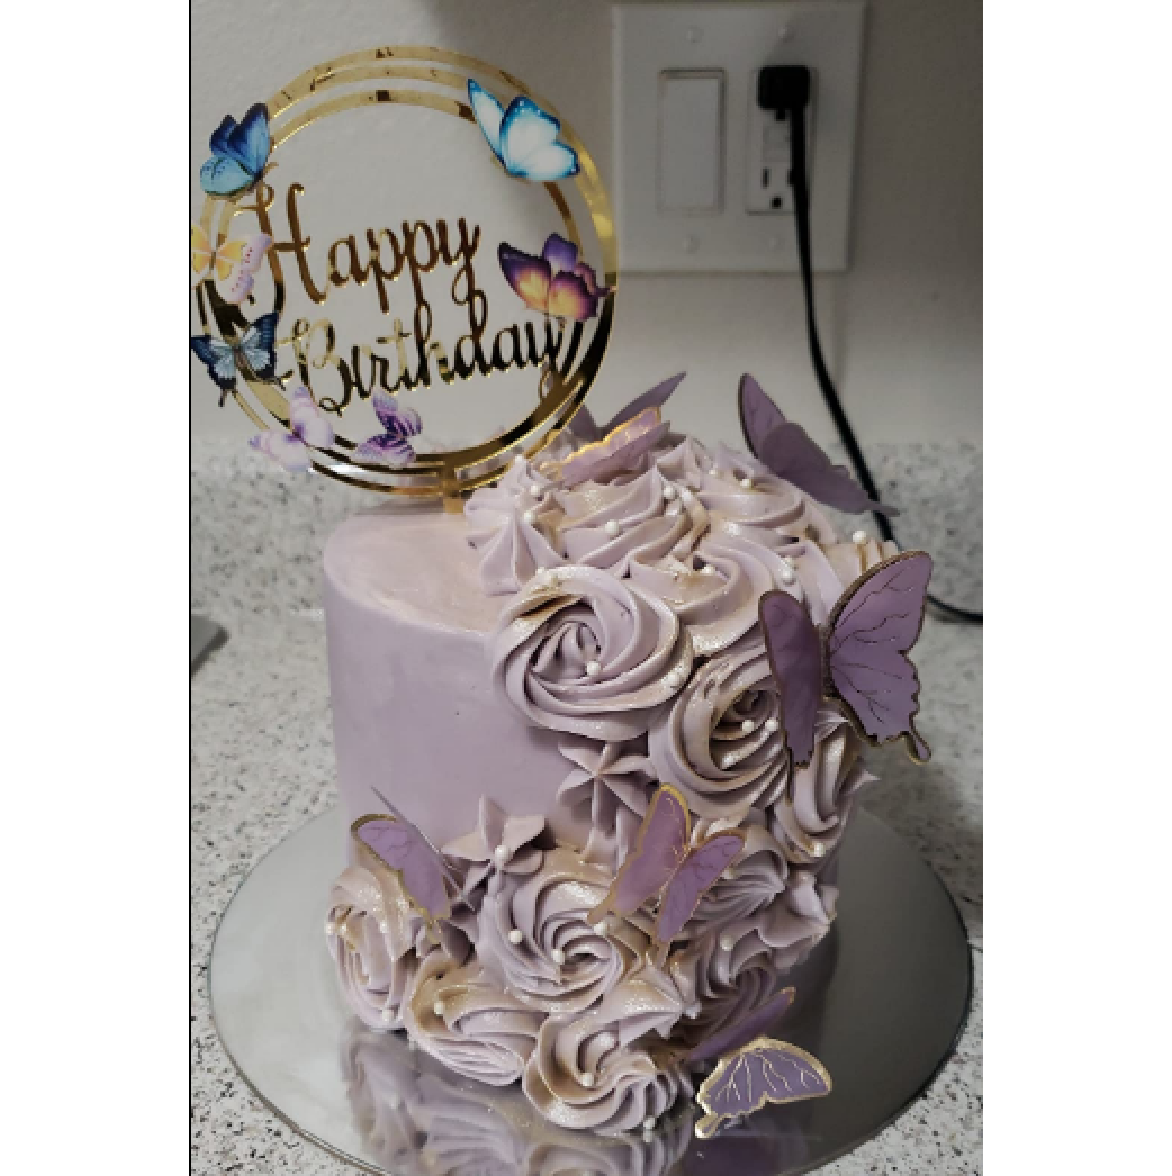 Cake Decoration, Cupcake Topper  - 3D Butterflies,, purple with gold trim - pack of 10 - Rampant Coffee Company